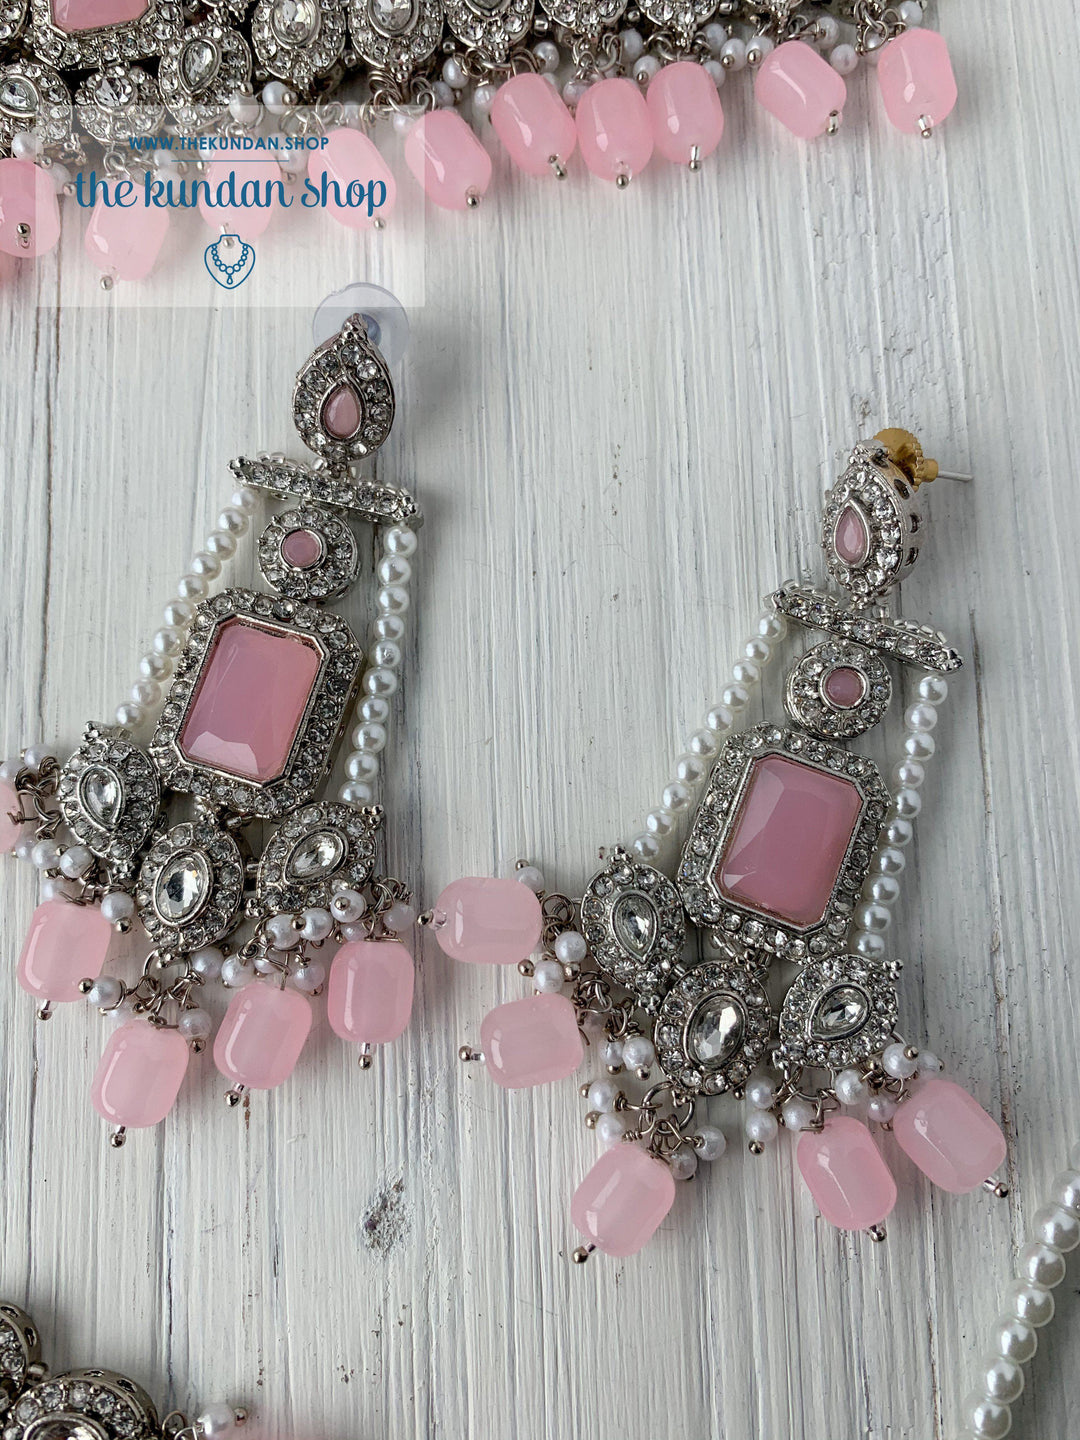 Magnificent Drops in Pink & Silver Necklace Sets THE KUNDAN SHOP 